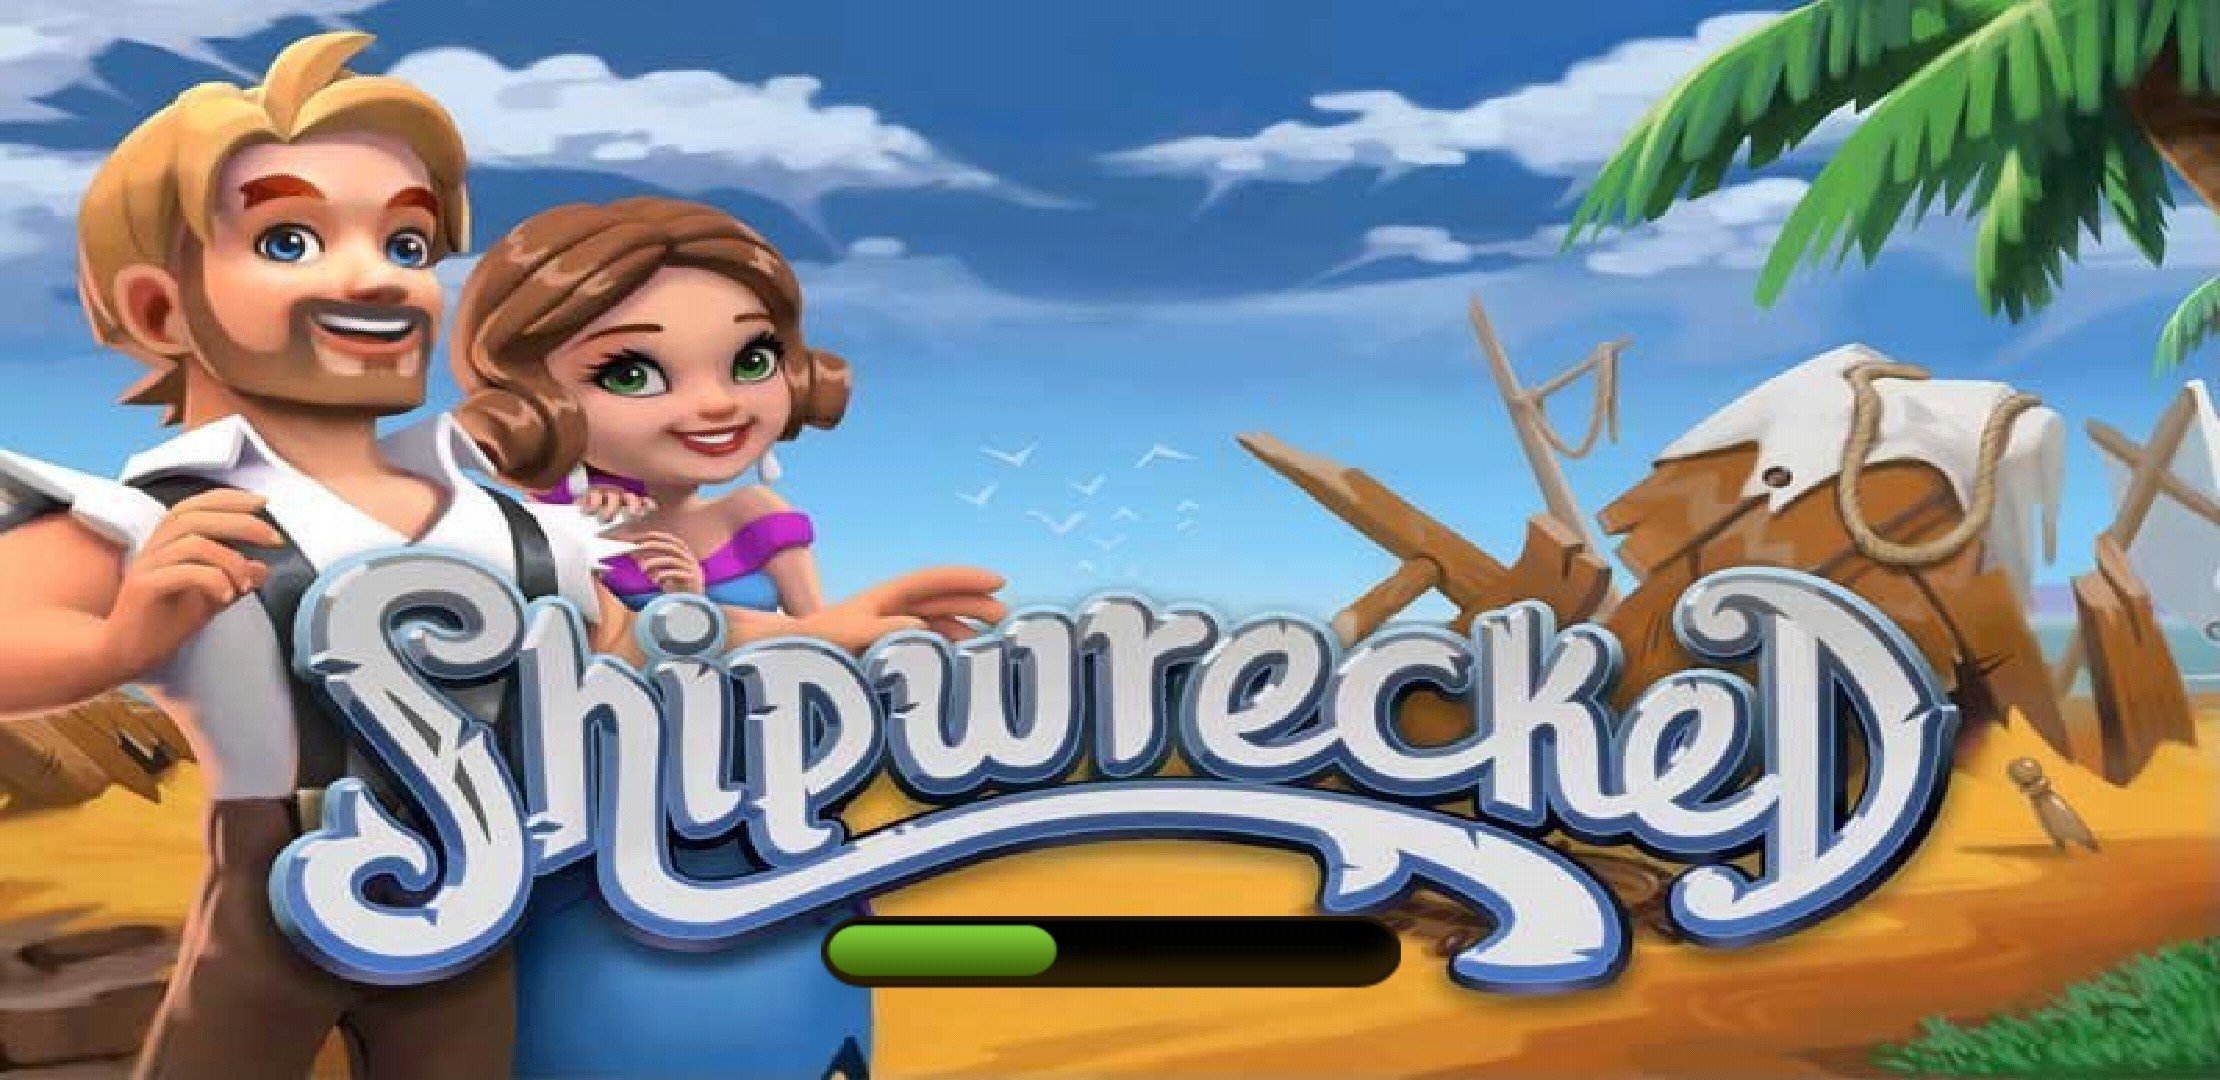 Download Shipwrecked: Lost Island Android latest Version